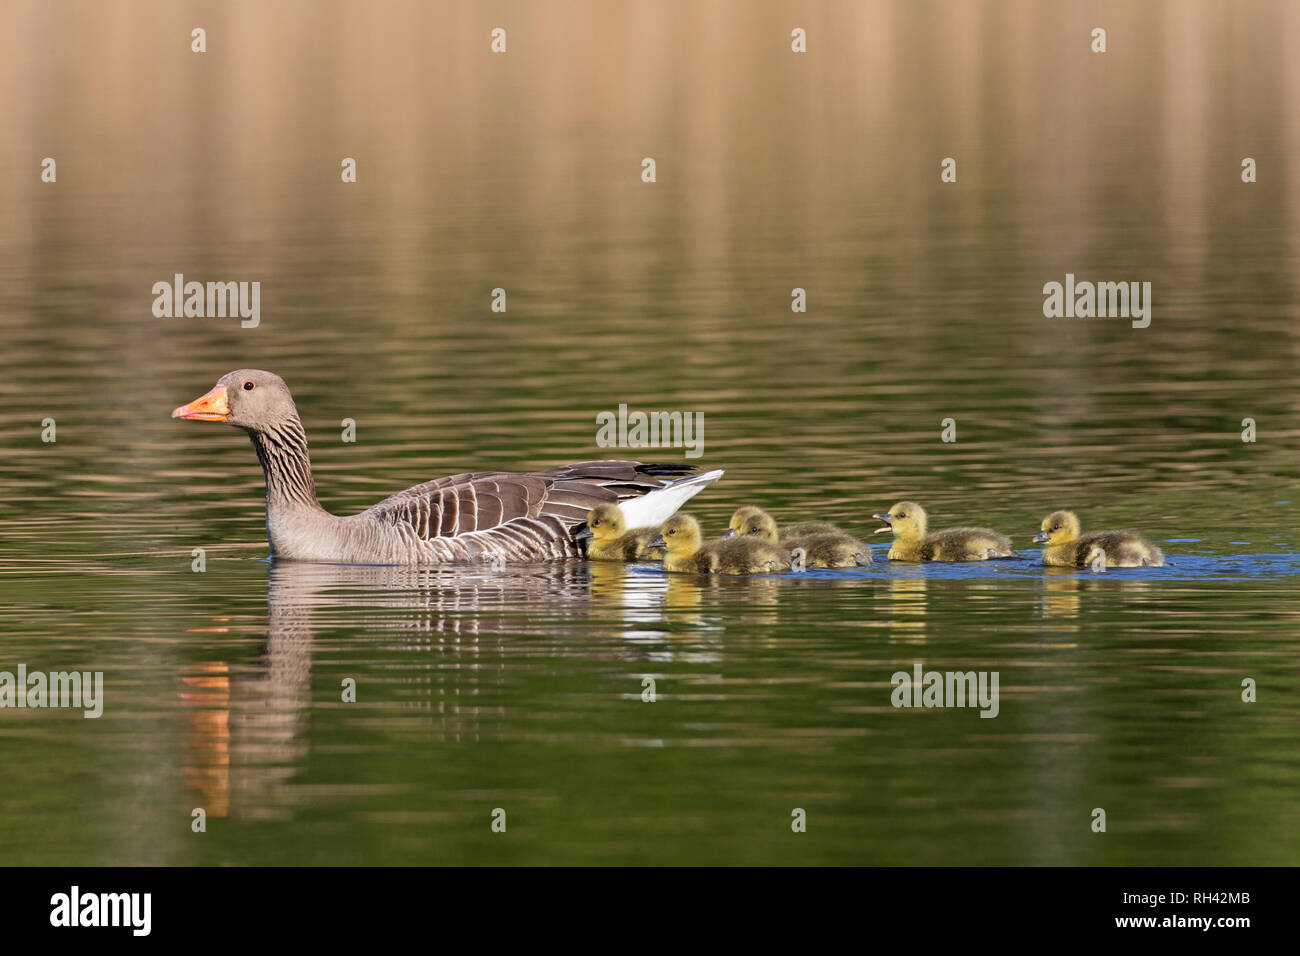 Row of goslings / chicks following greylag goose (Anser anser) parent swimming in lake in spring Stock Photo